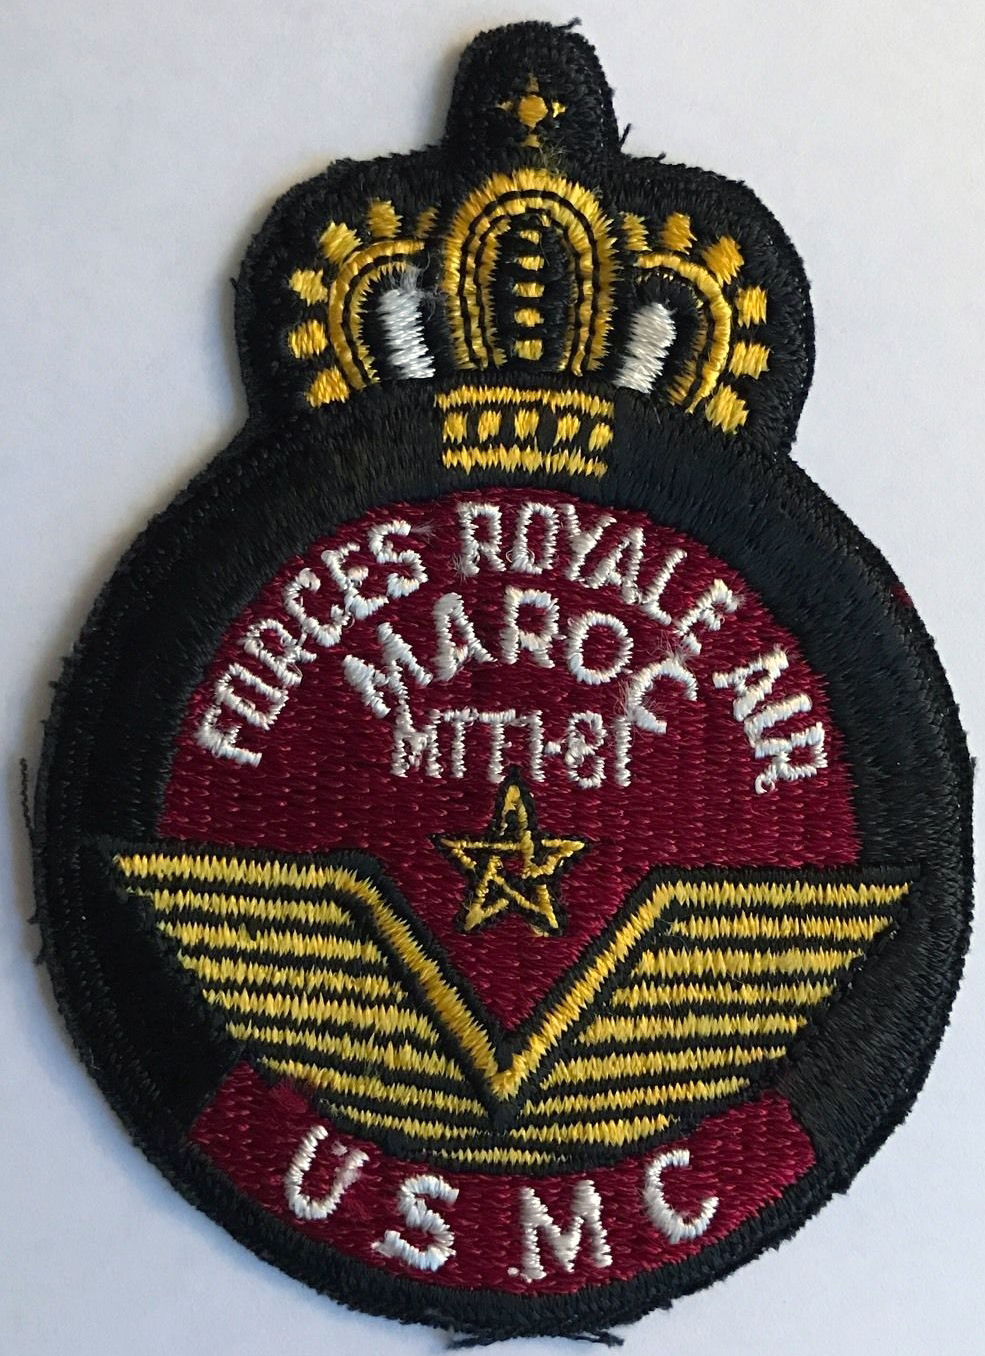 RMAF insignia Swirls Patches / Ecussons,cocardes et Insignes Des FRA - Page 6 31949553314_d7c8aa3042_o